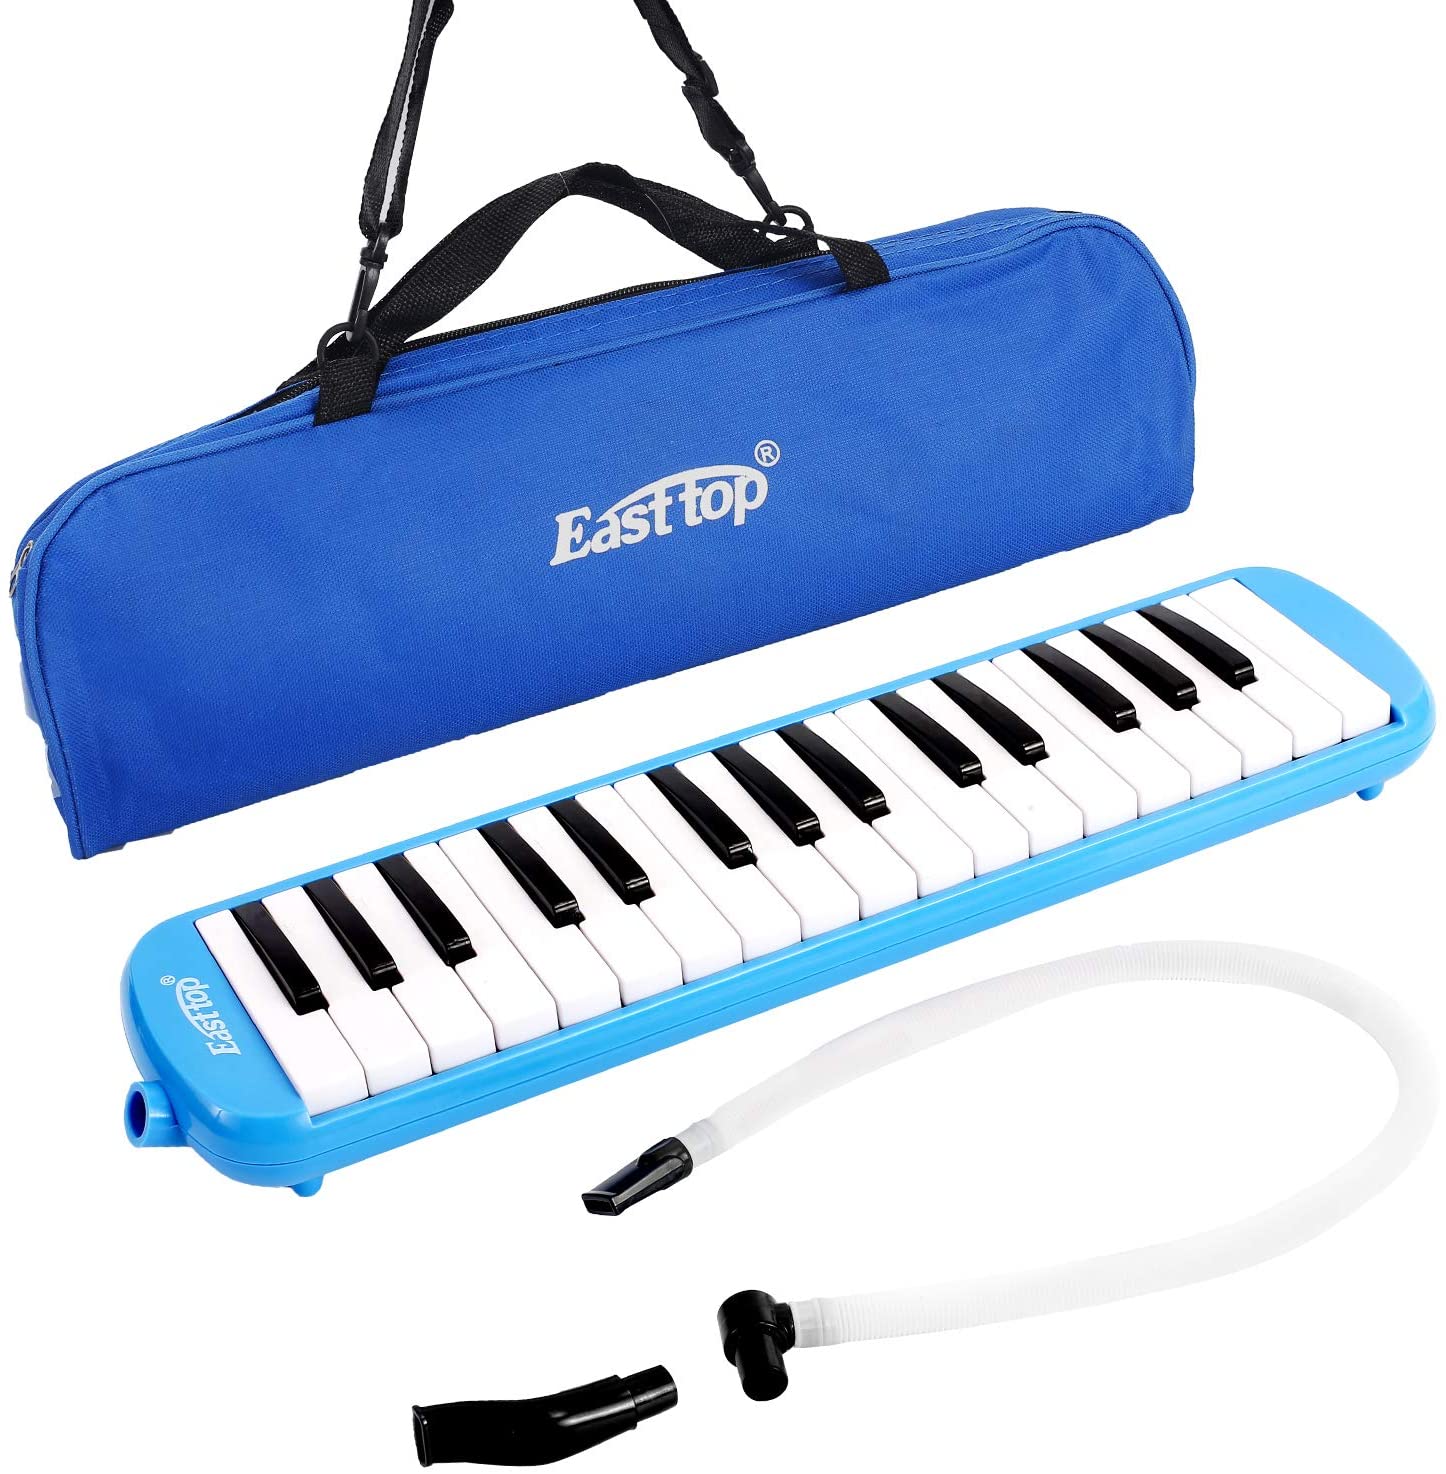 East top 32-Key Professional Mouth Melodica, Instrument Mouth Keyboard Organ Melodica Set-Black - Easttop harmonica store